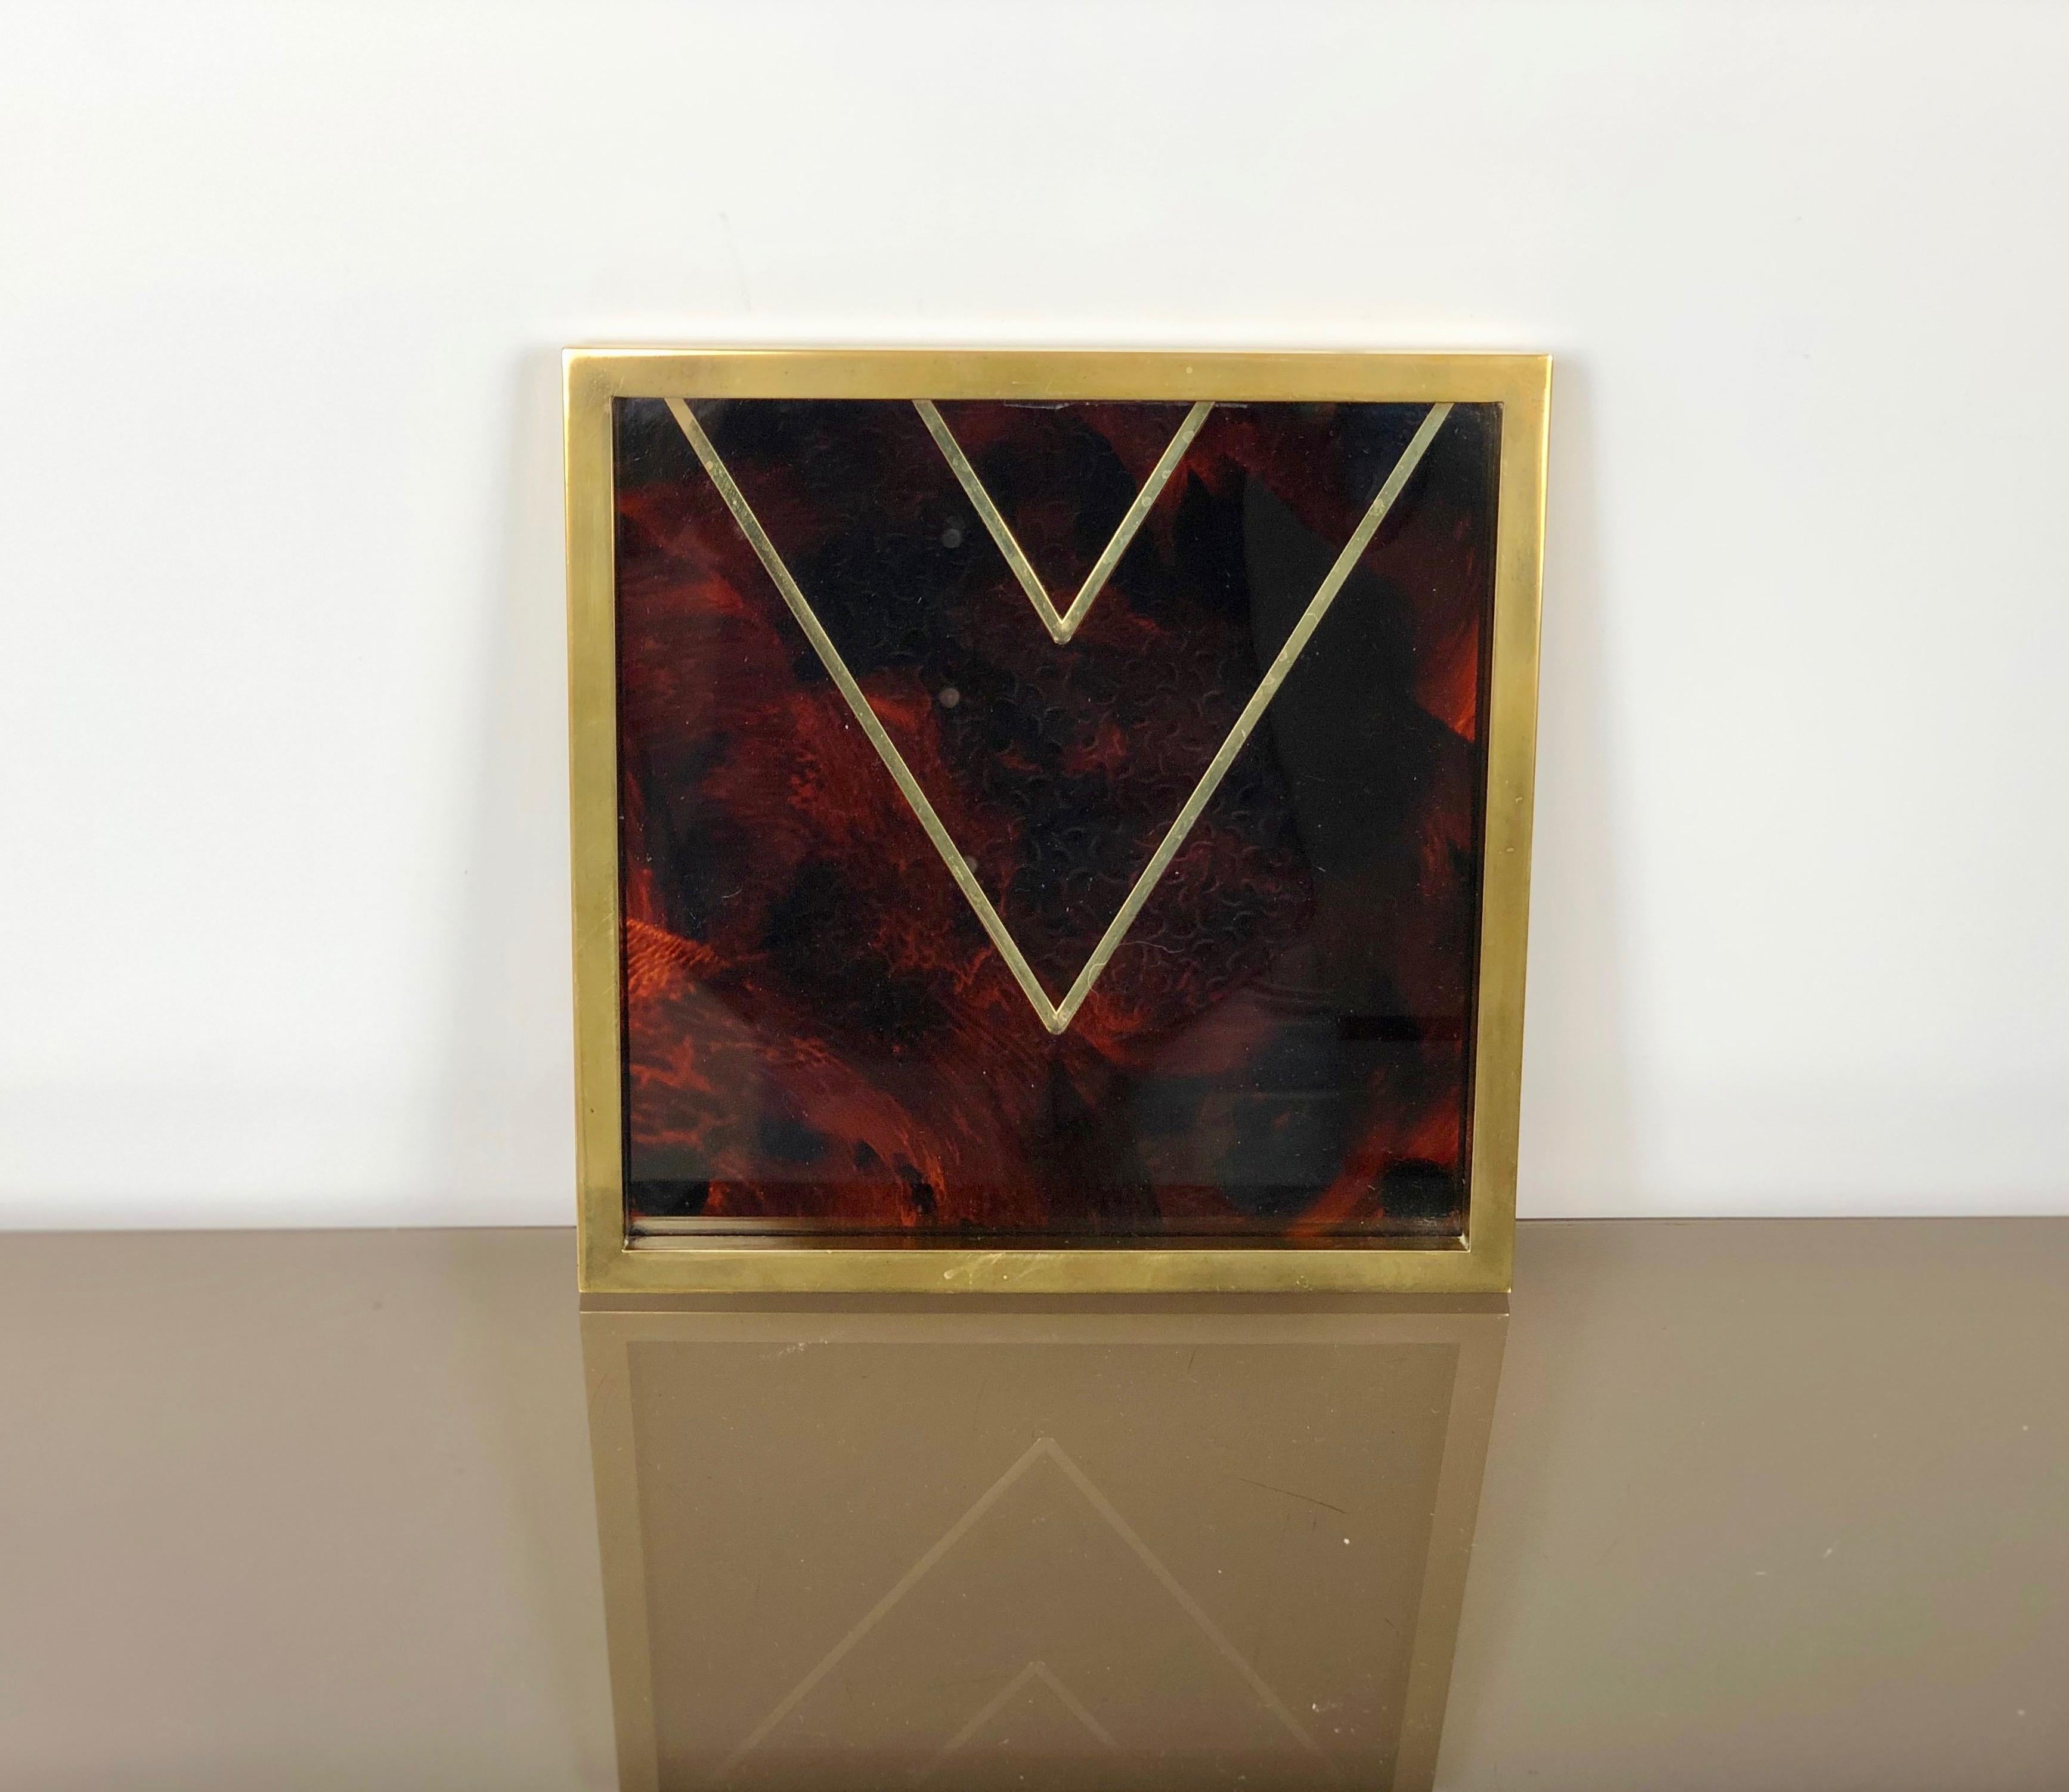 Square tray with faux tortoise pattern in glass and plexiglass/Lucite with diagonal lines in brass. By the Italian designer Romeo Rega - 1970 circa. 

Conditions are good, some sign of the time on the brass as the photos show.